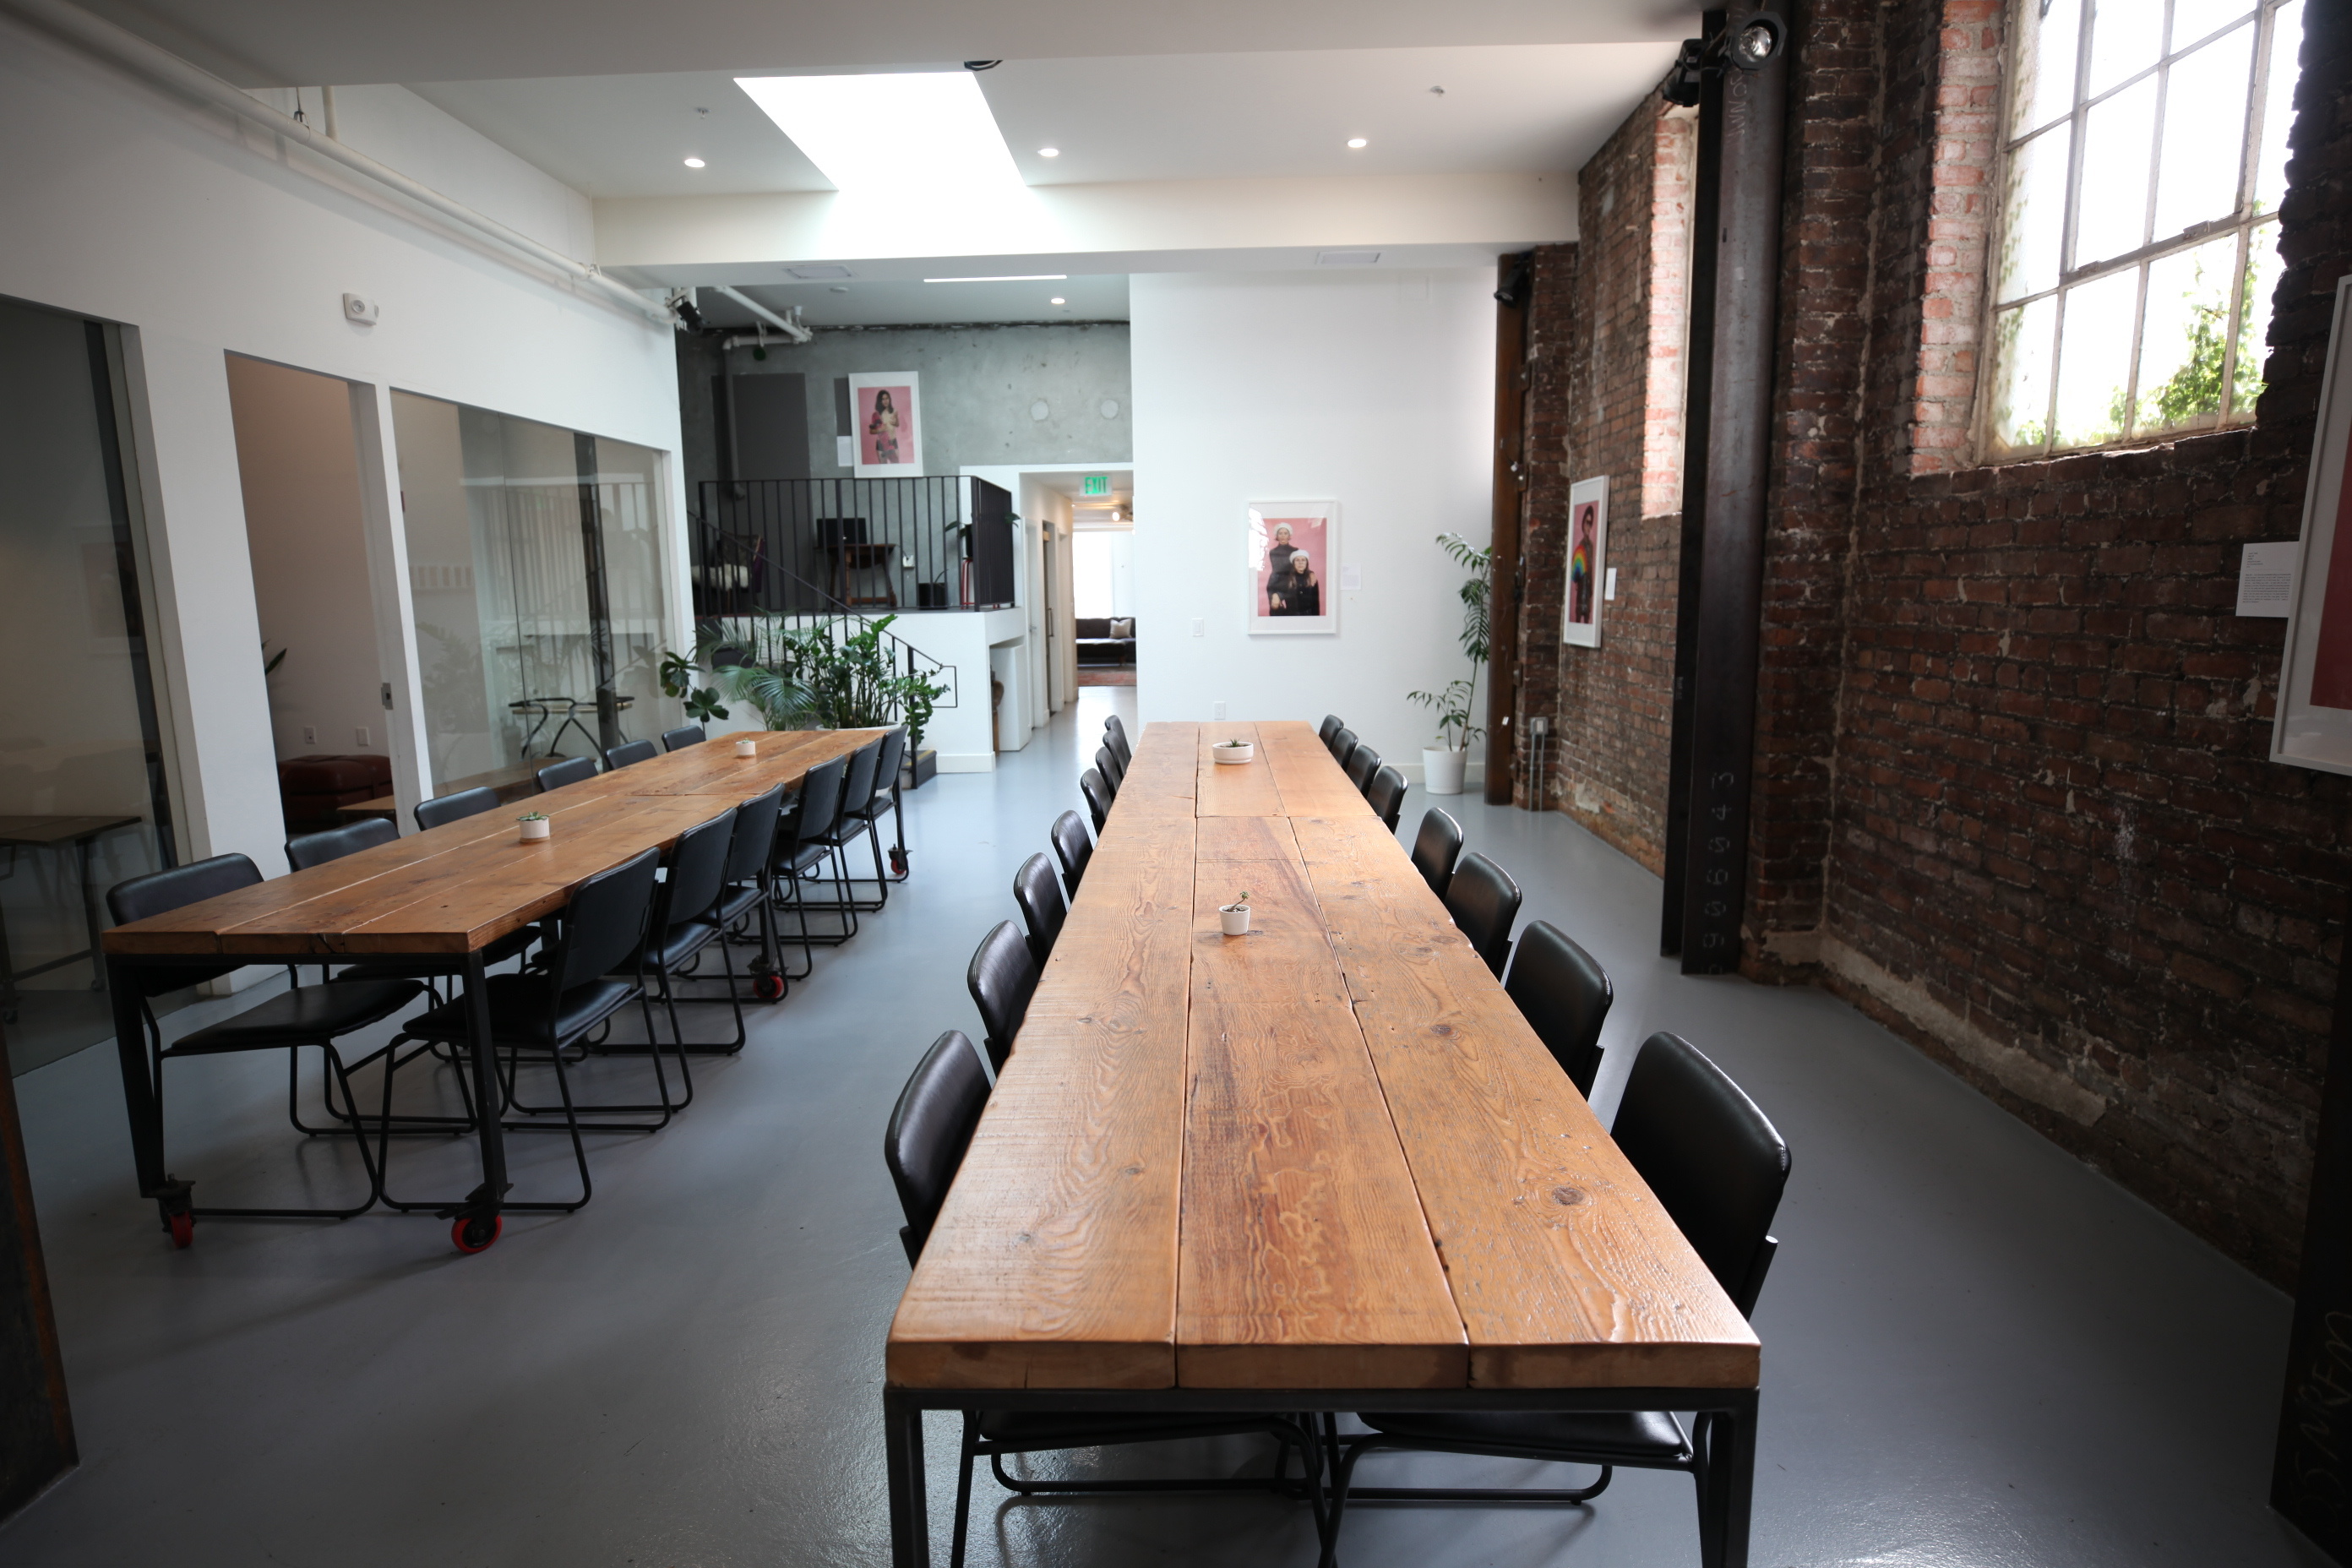 Bright industrial meeting space, Gallery in San Francisco, Off-site event space, Creative workspace, 2790x1860 HD Desktop